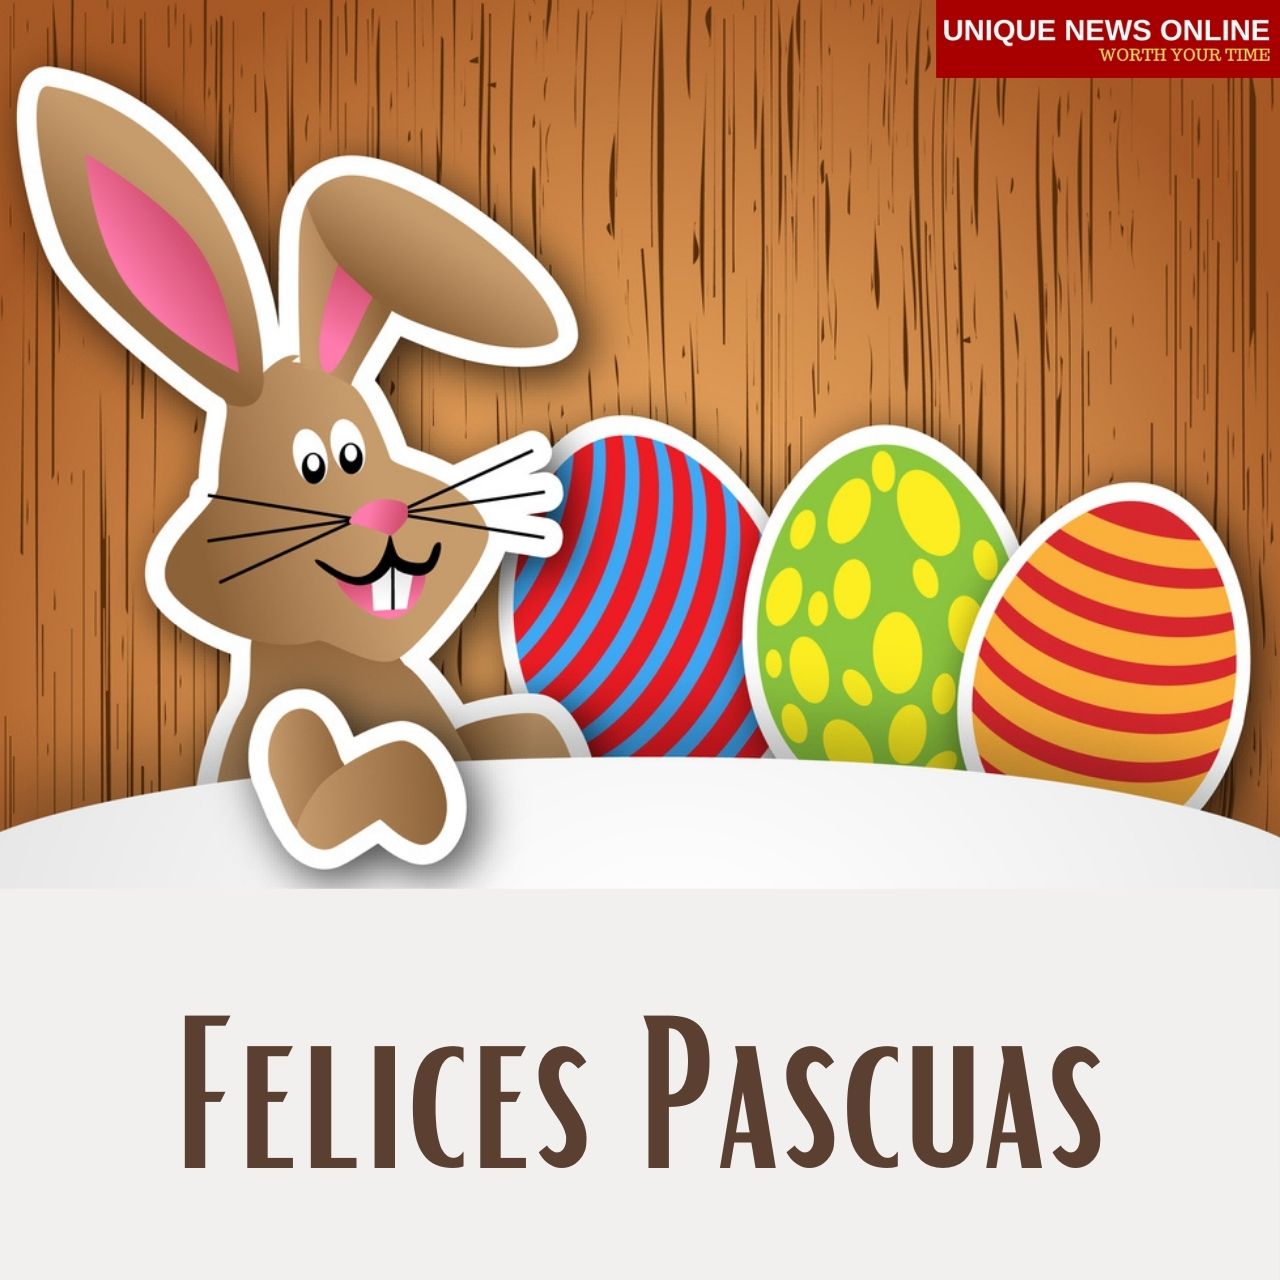 Happy Easter Sunday 2021 Wishes in Spanish, Messages, Greetings, Quotes, and Images to Share on Felices Pascuas